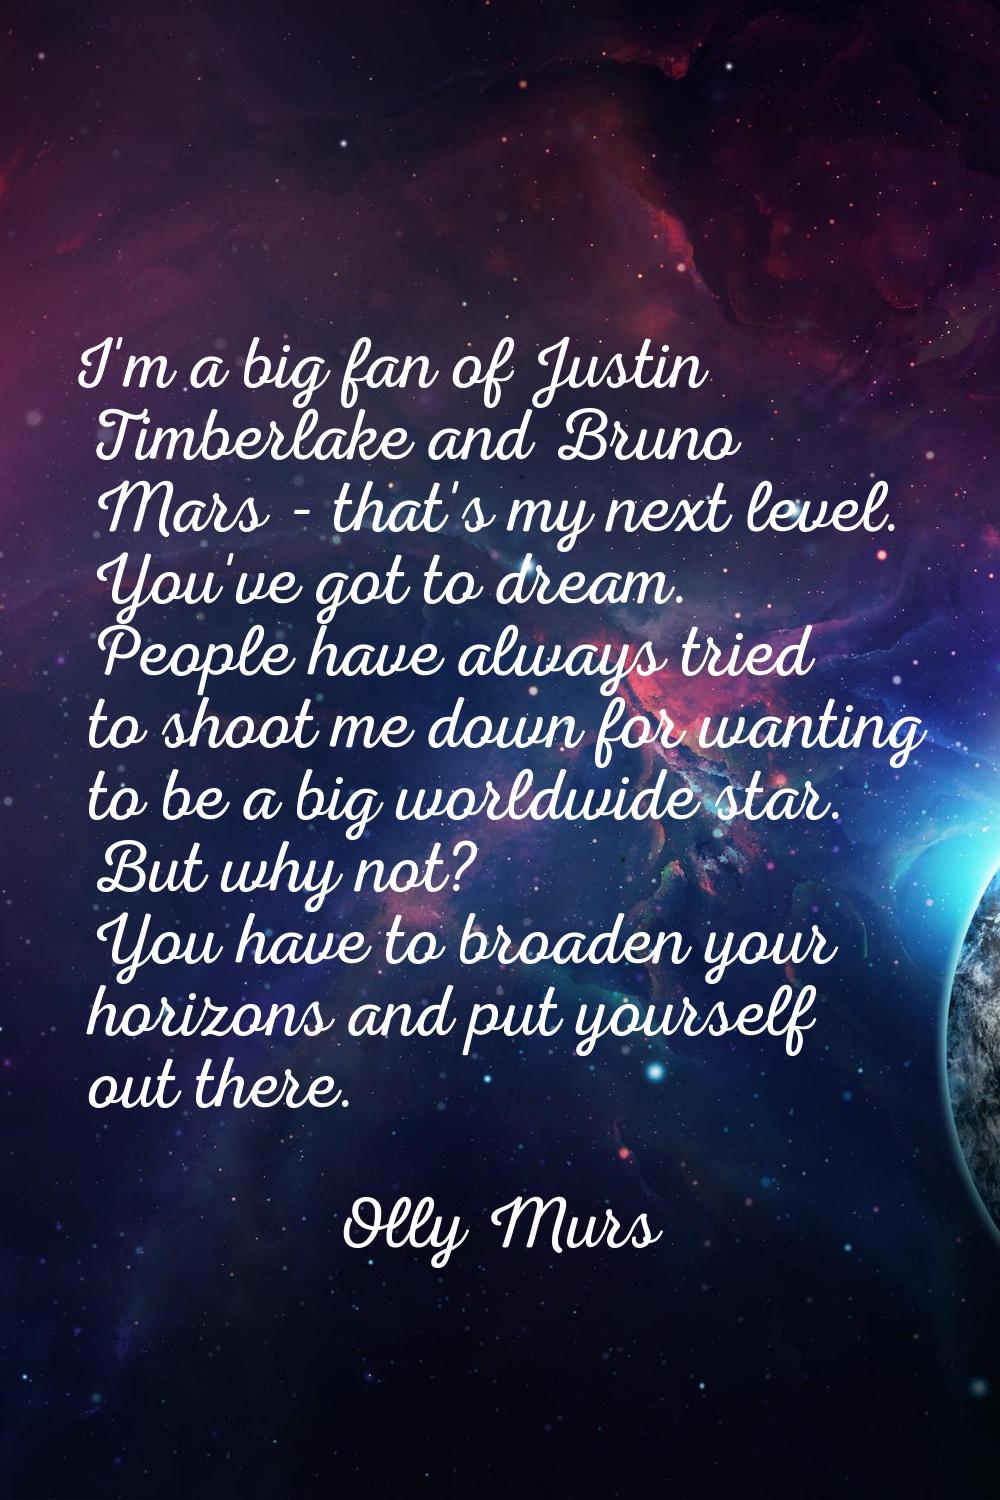 I'm a big fan of Justin Timberlake and Bruno Mars - that's my next level. You've got to dream. Peop